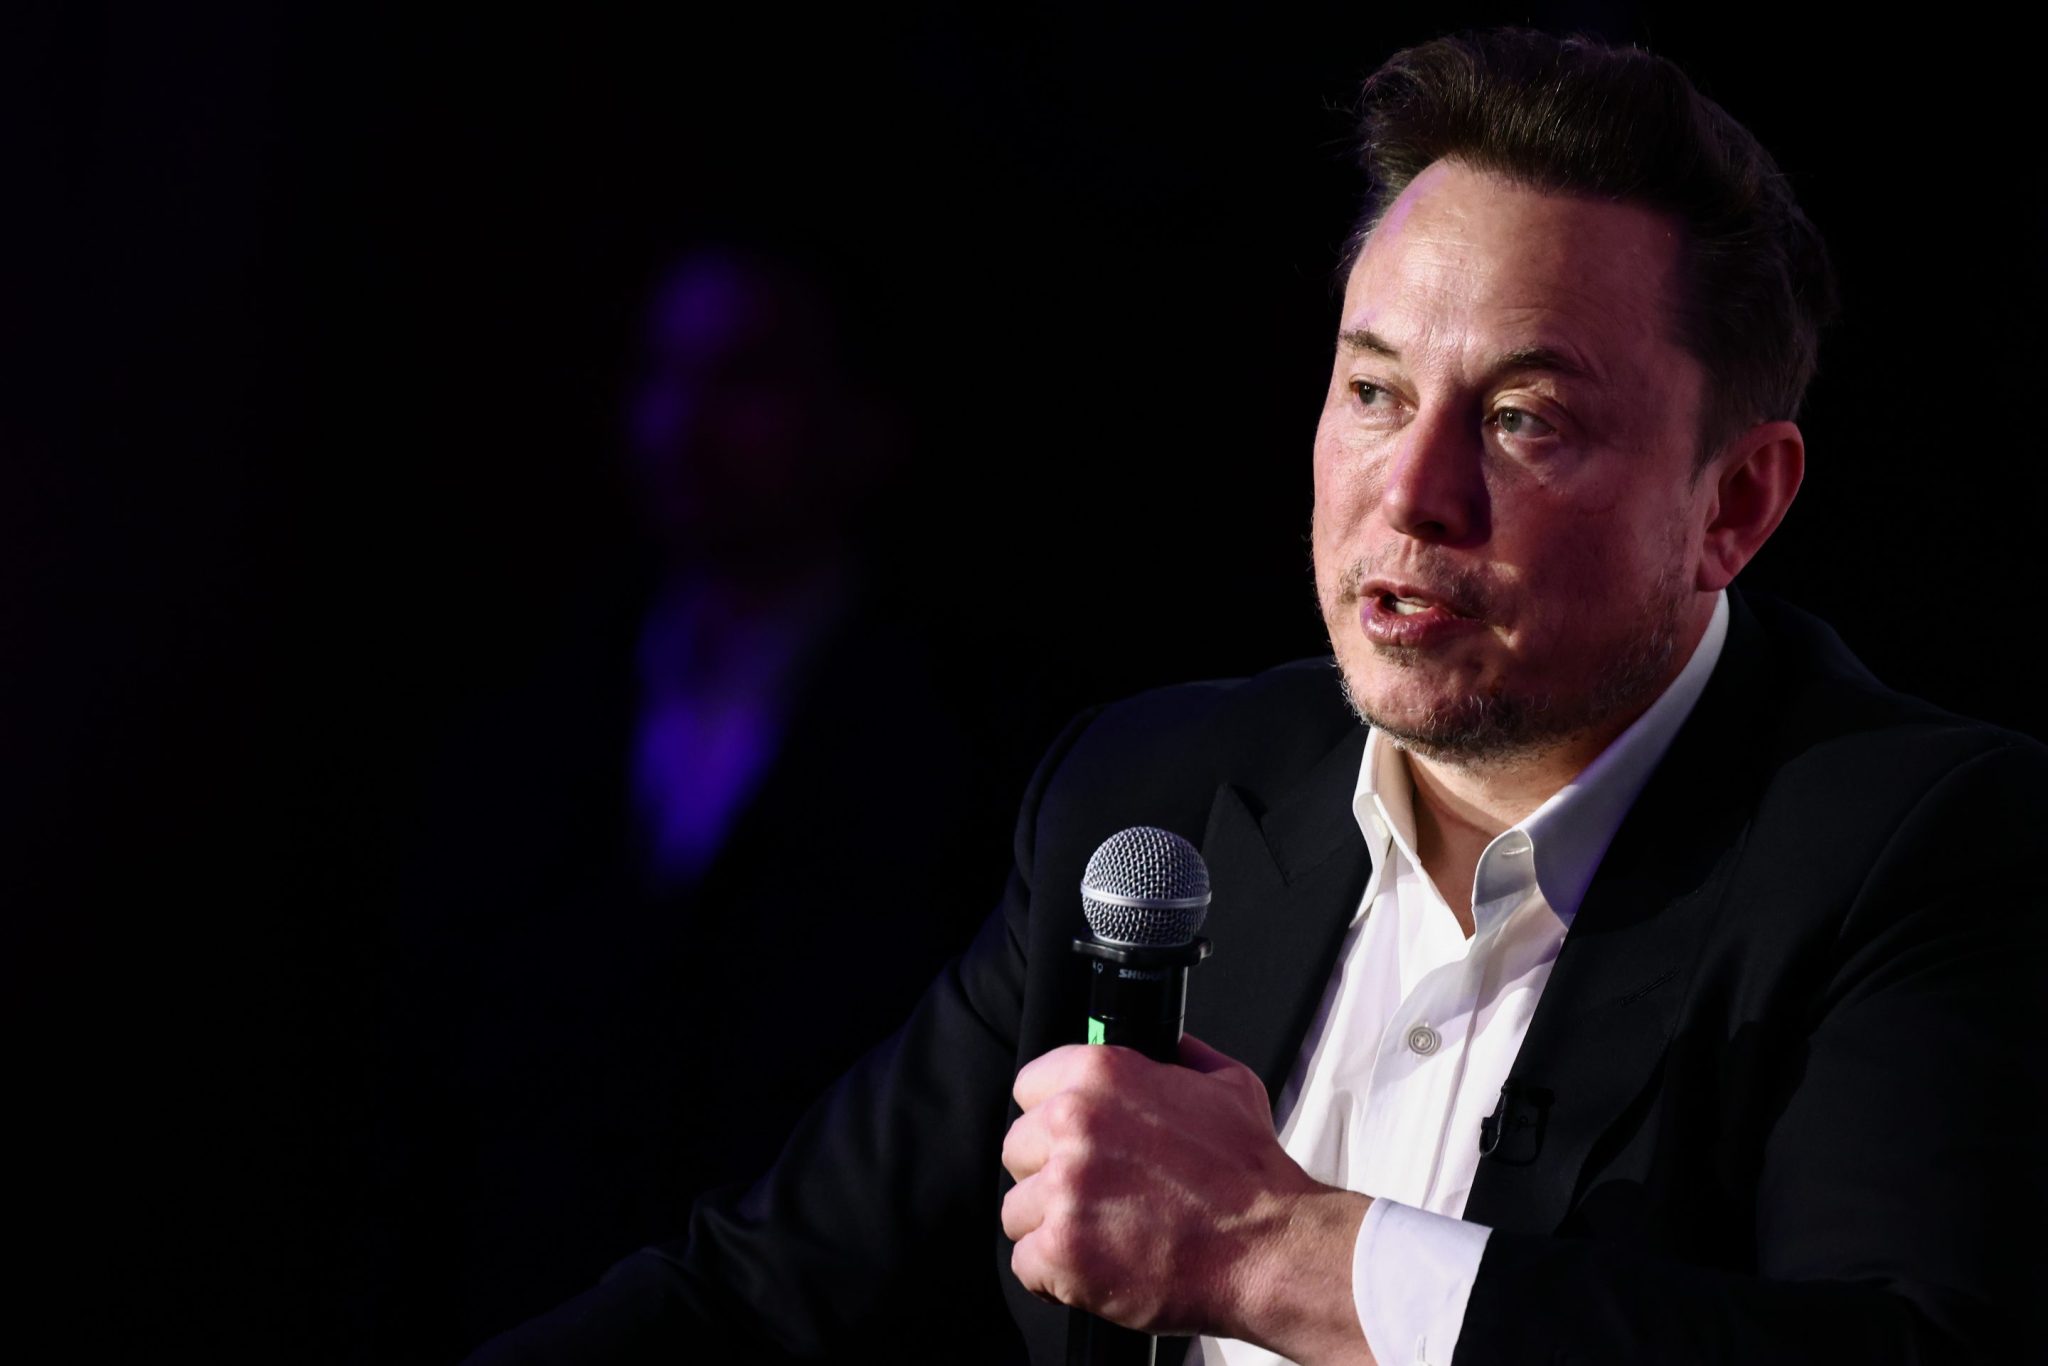 Elon Musk is suing OpenAI and Sam Altman for breaching startup’s founding agreement and putting profit ahead of benefitting humanity